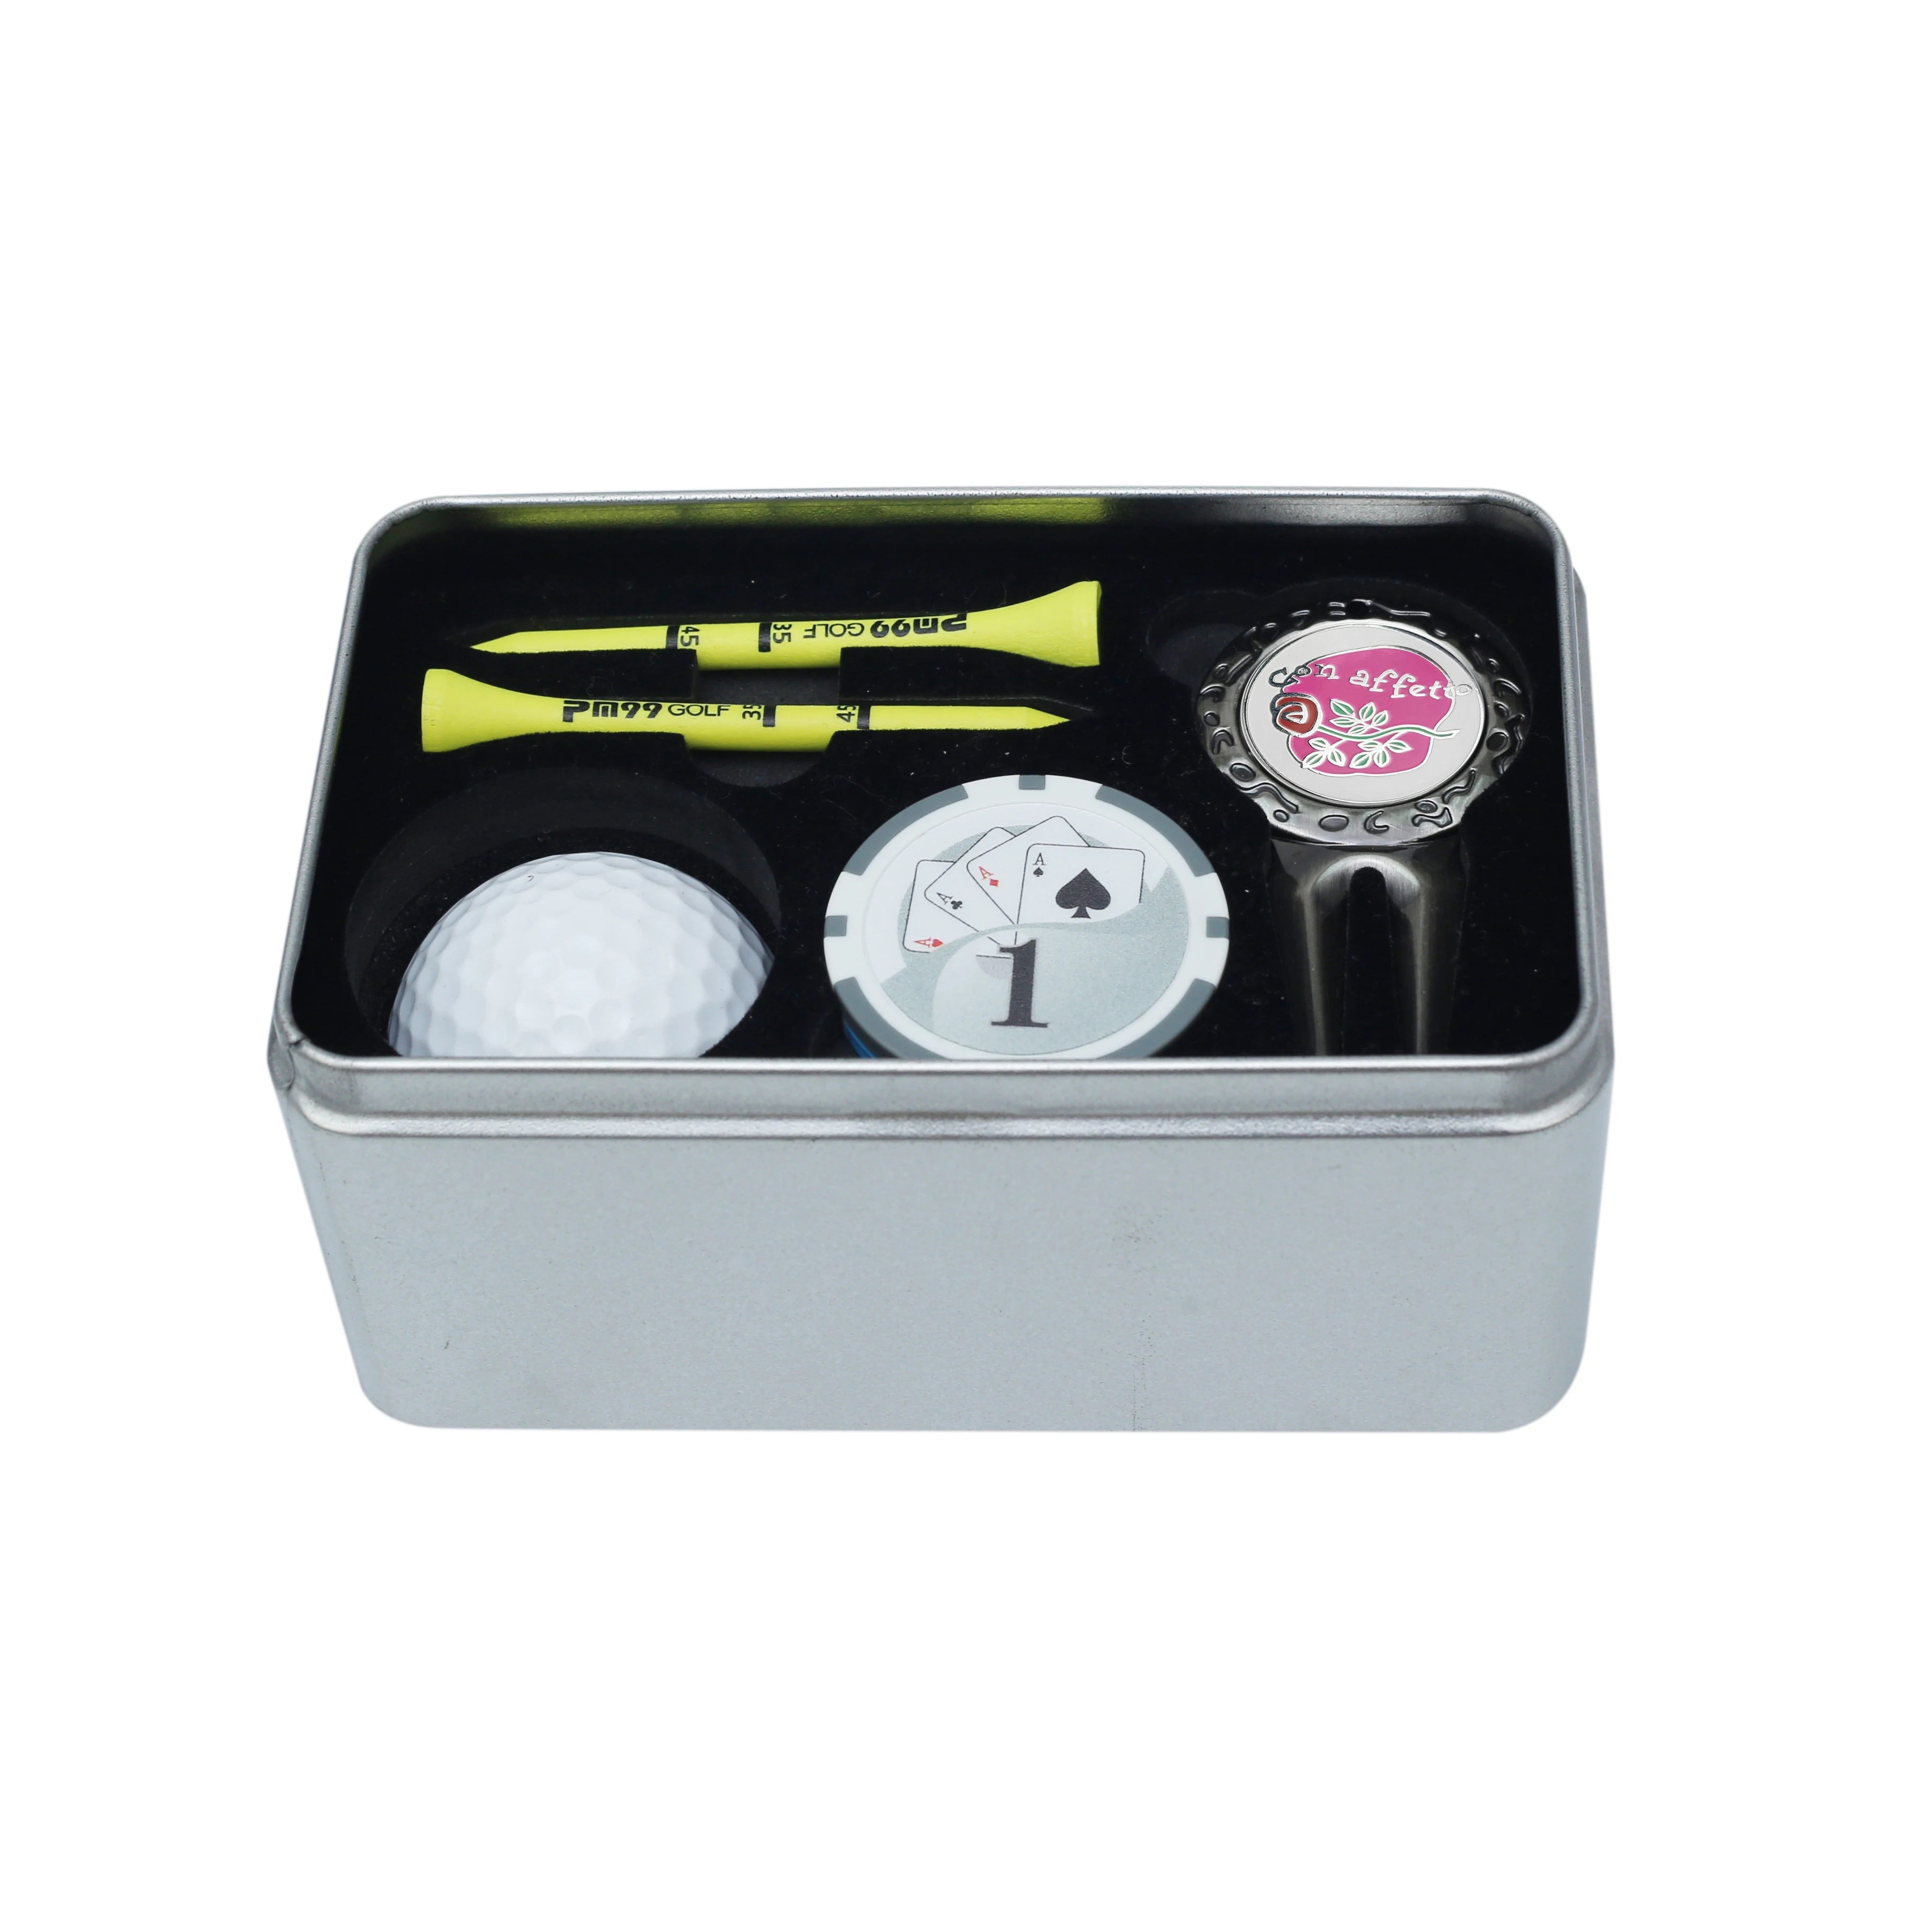 Golf gifts set box with golf divot tools, golf tees, ball markers and golf balls